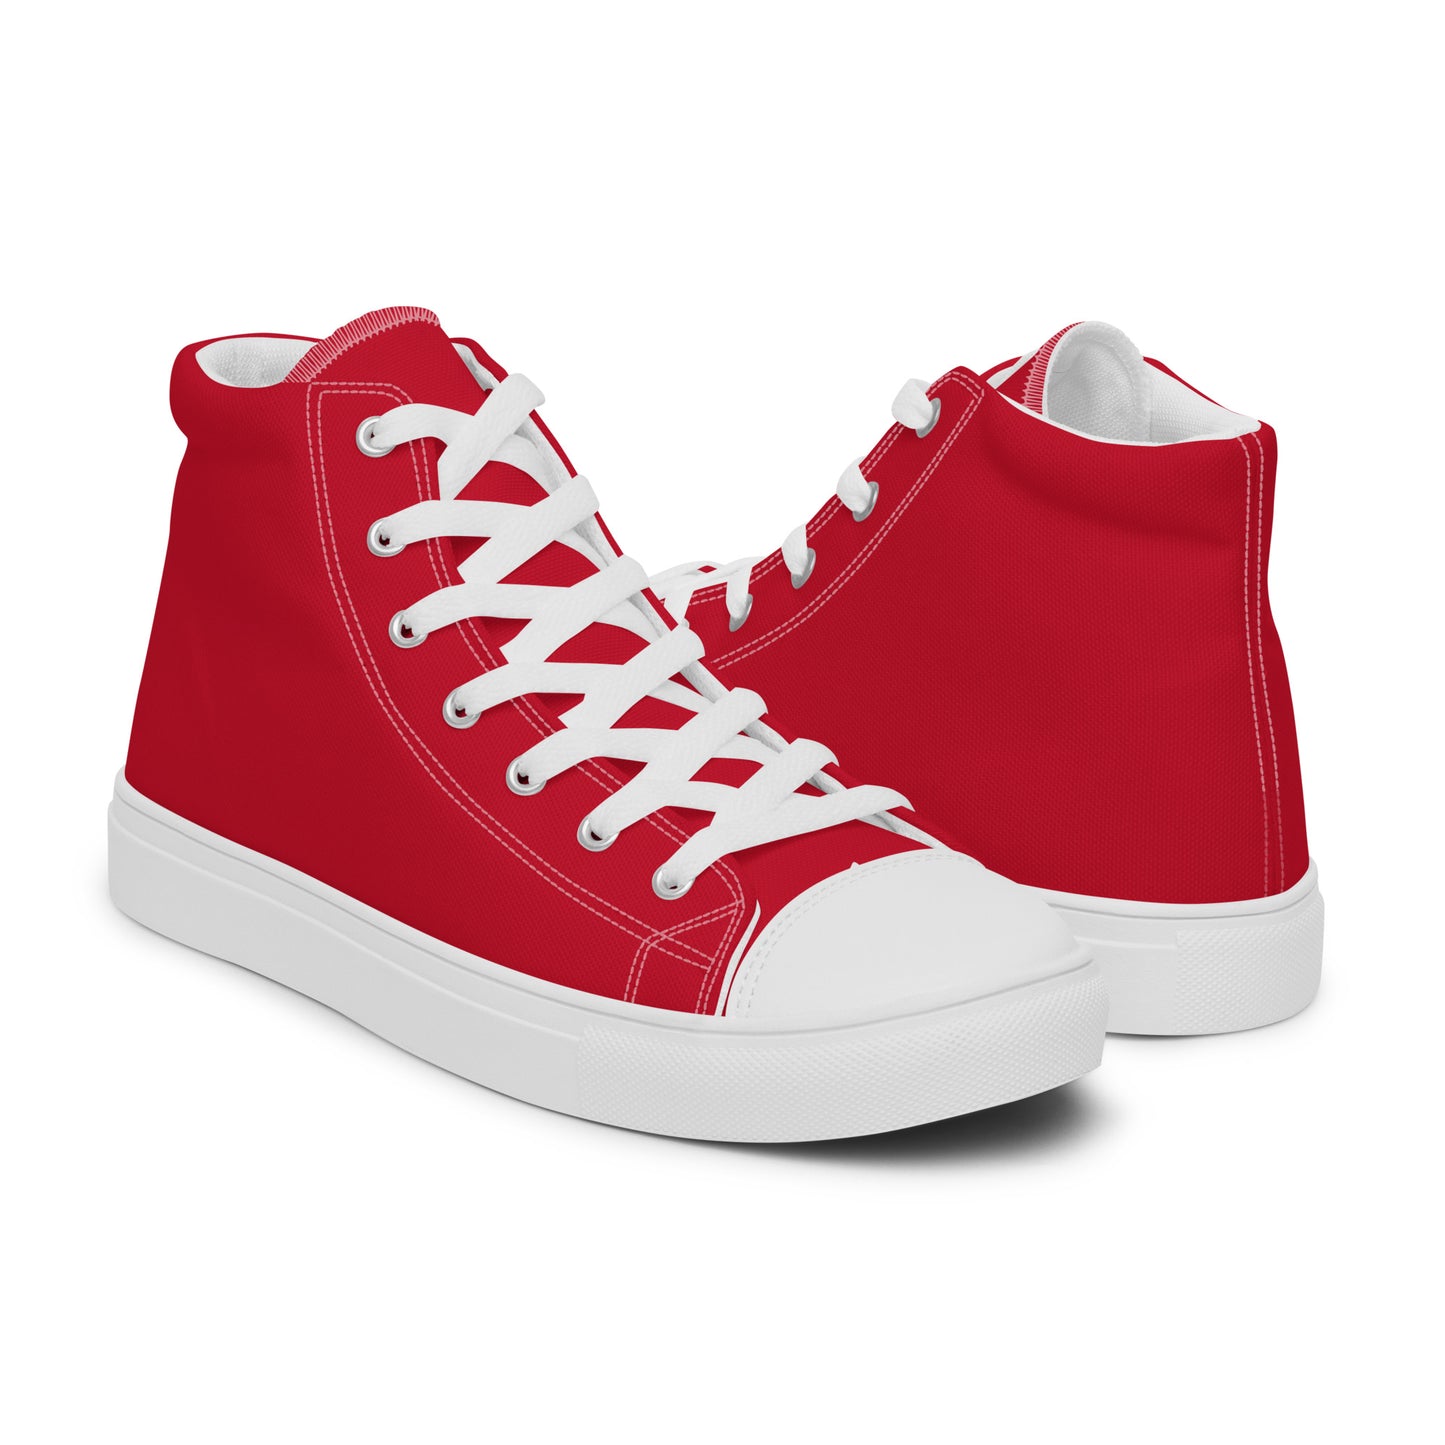 Basic Red - Sustainably Made Men's High Top Canvas Shoes